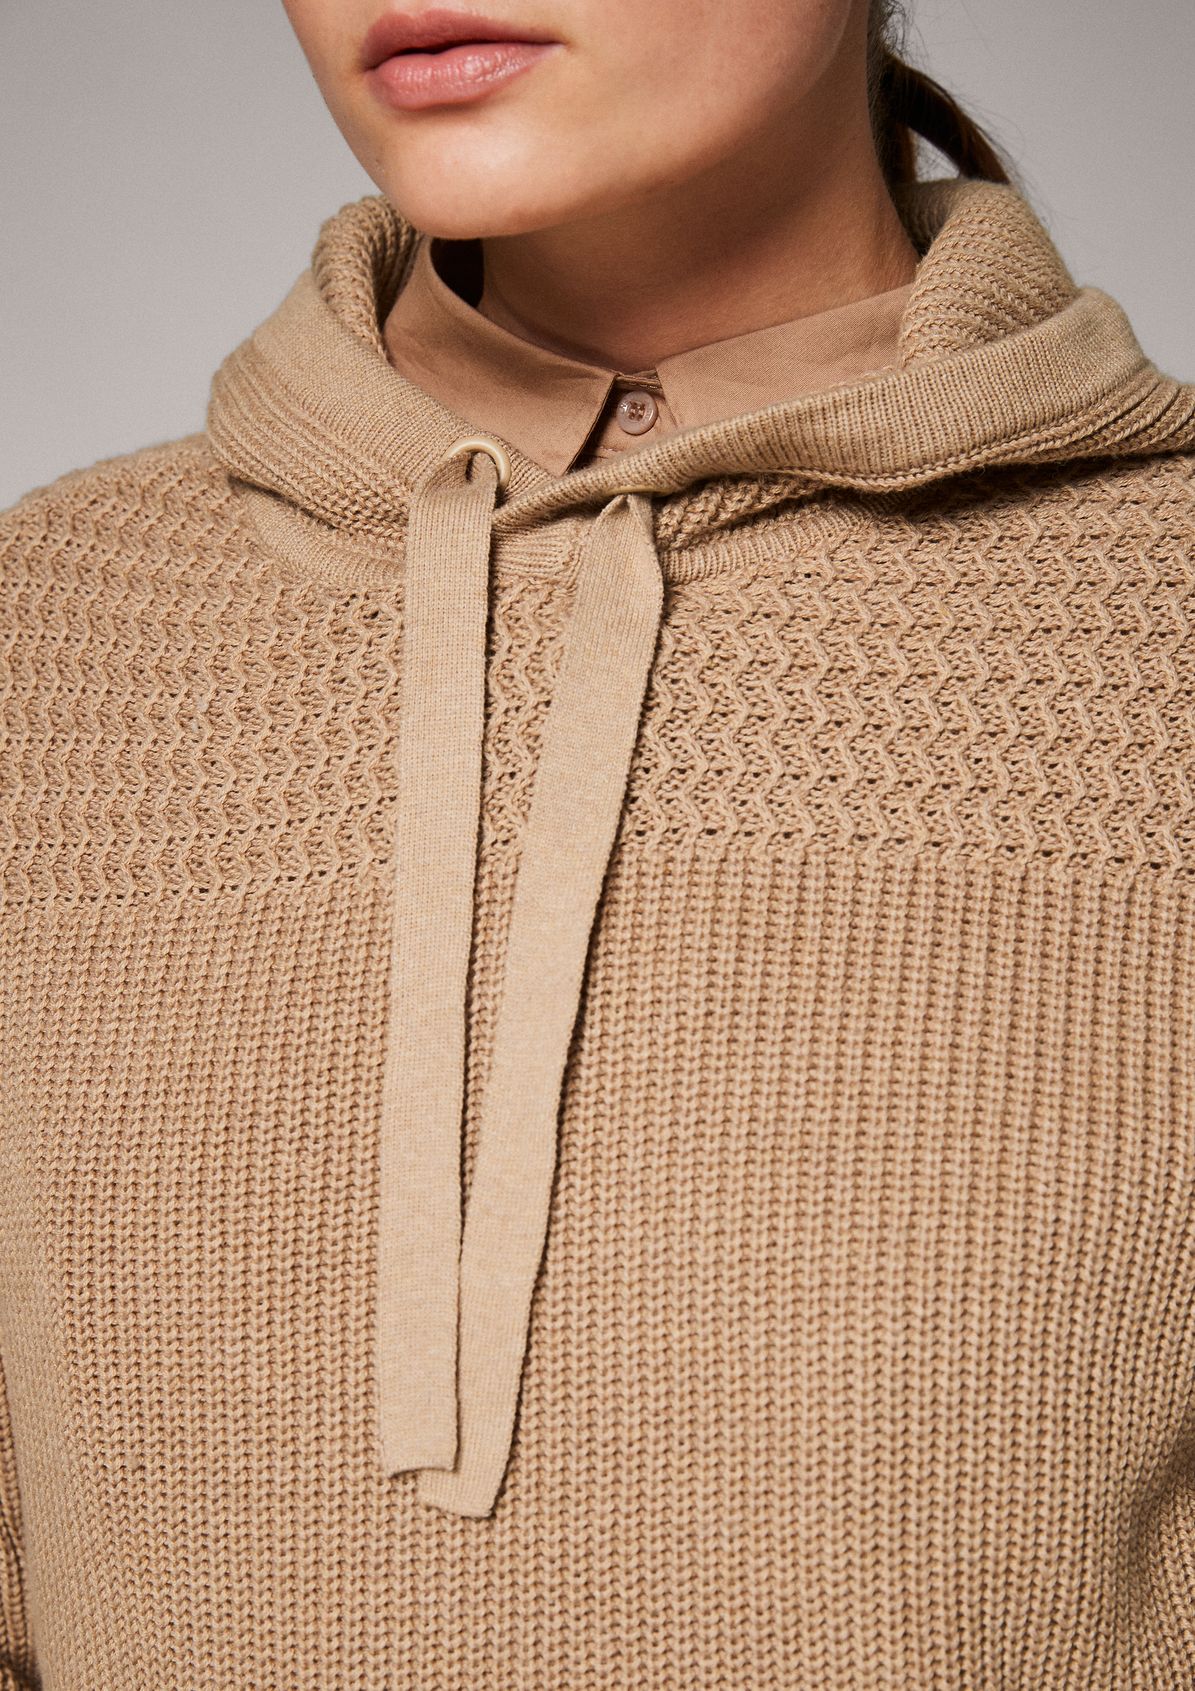 Hooded jumper with a knitted pattern from comma